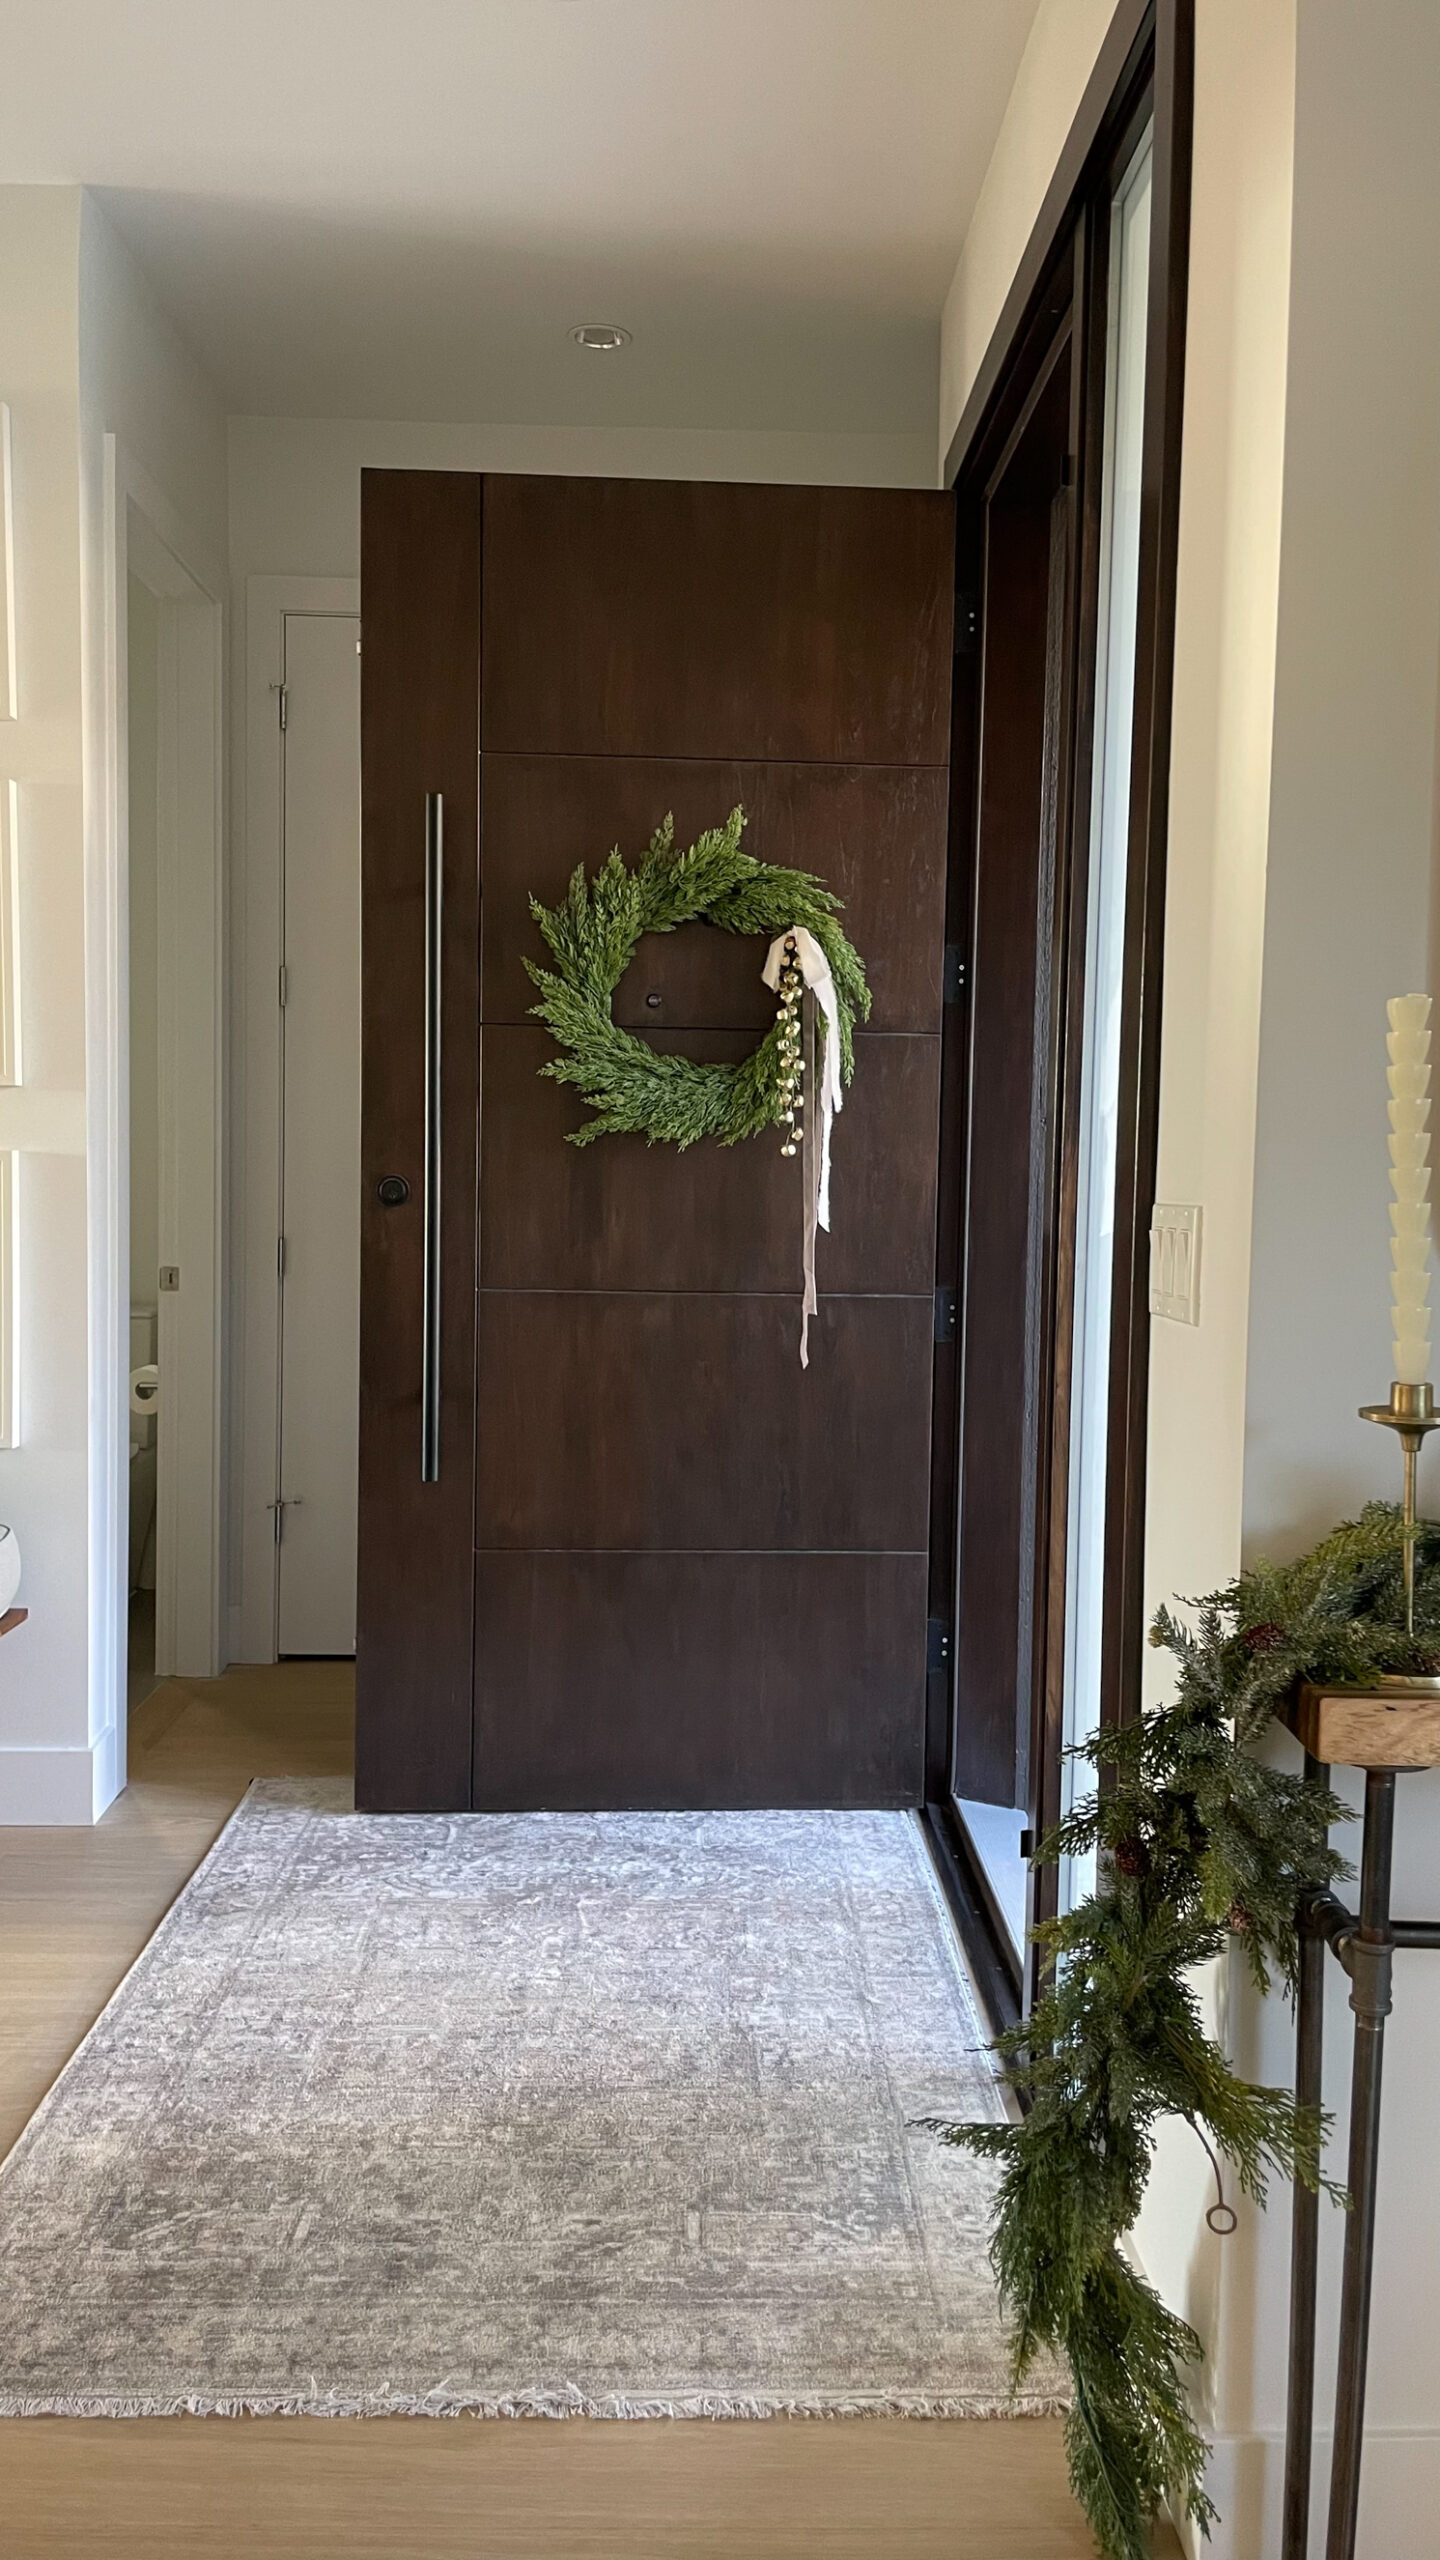 wreath hanging on the front door with ribbon and bells